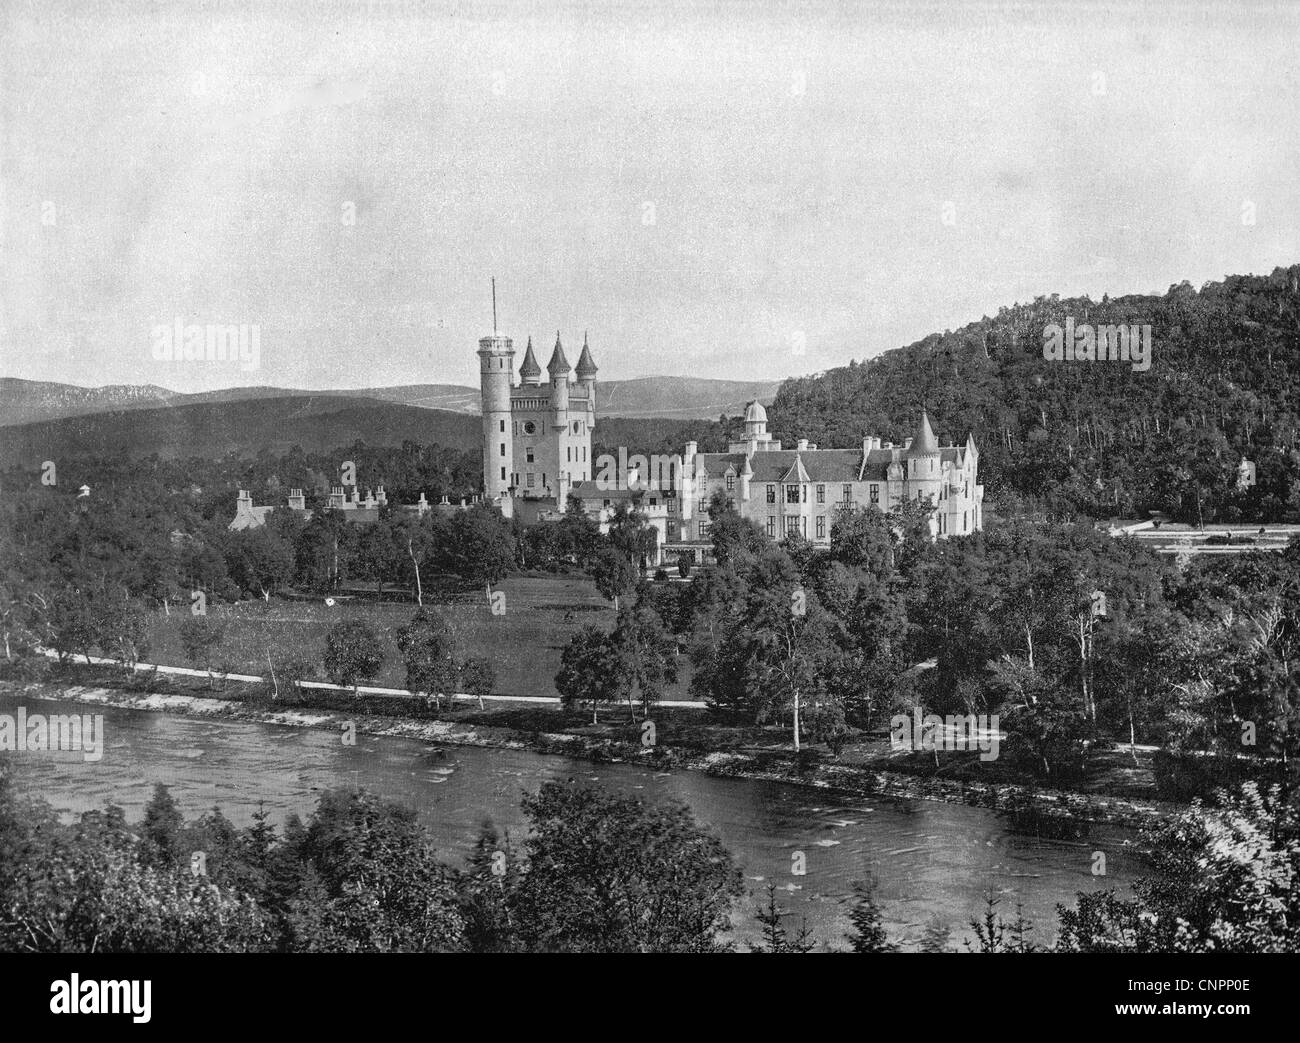 Balmoral castle queen victoria hi-res stock photography and images - Alamy